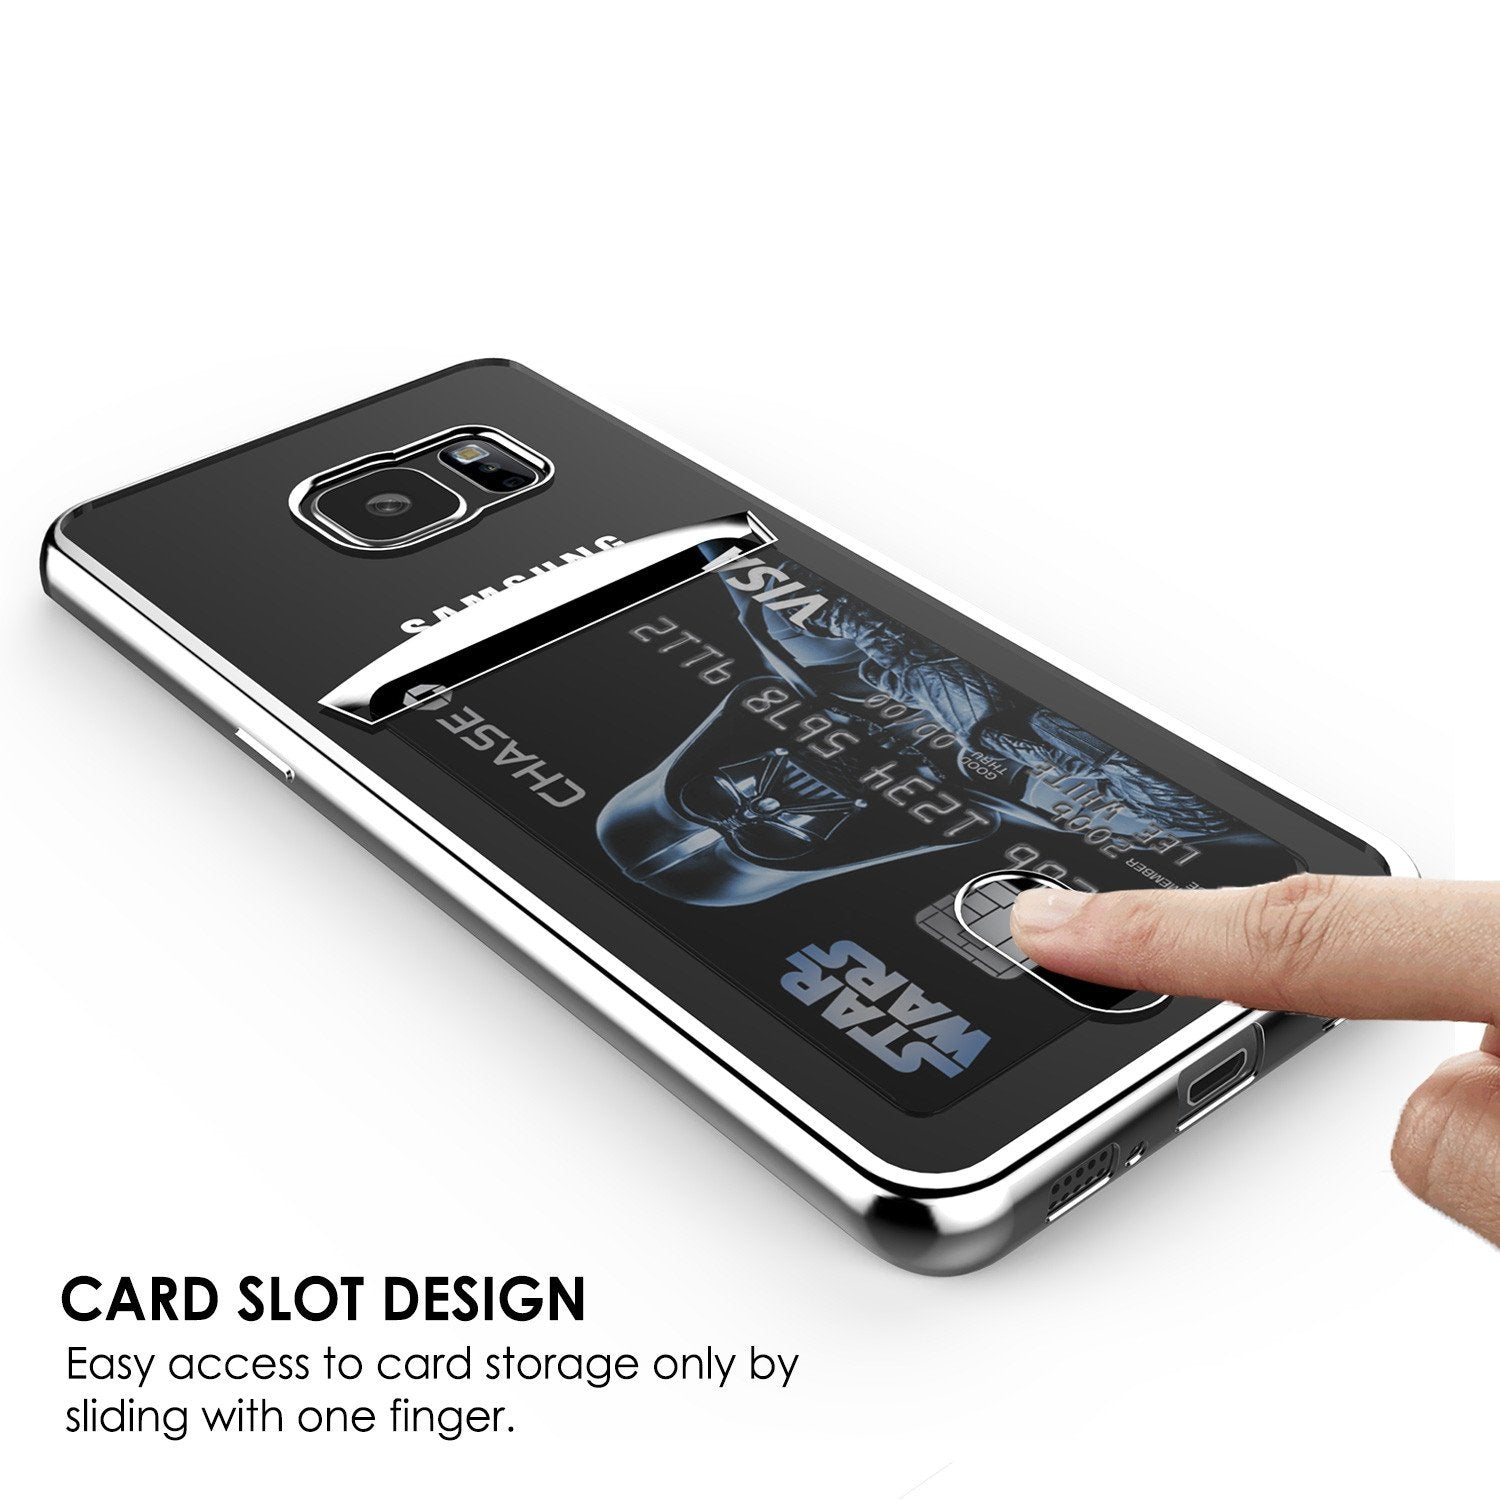 Galaxy S6 EDGE+ Plus Case, PUNKCASE® LUCID Silver Series | Card Slot | SHIELD Screen Protector